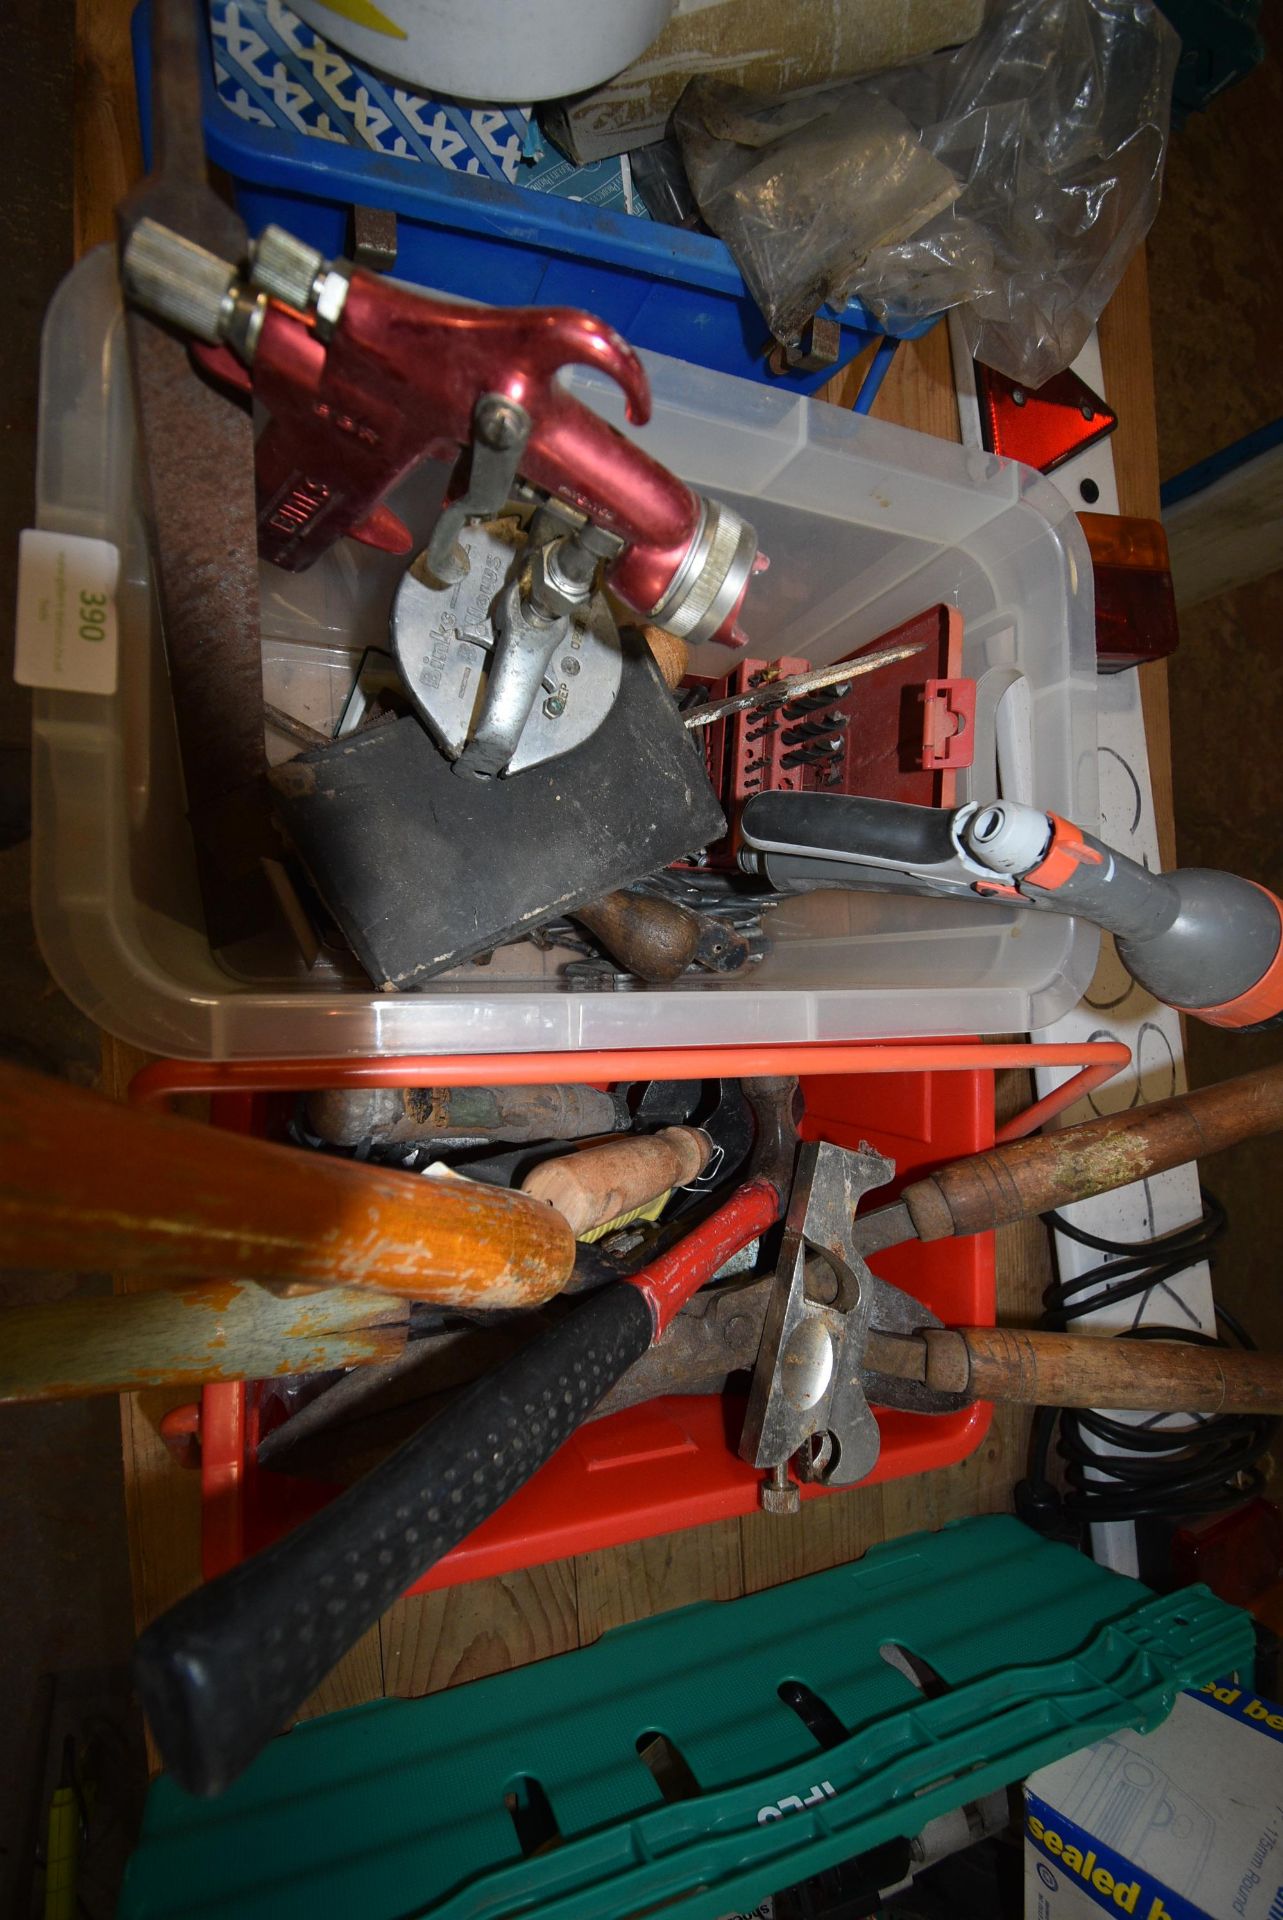 Two Boxes of Gardening Tools, Planers, Files, Spra